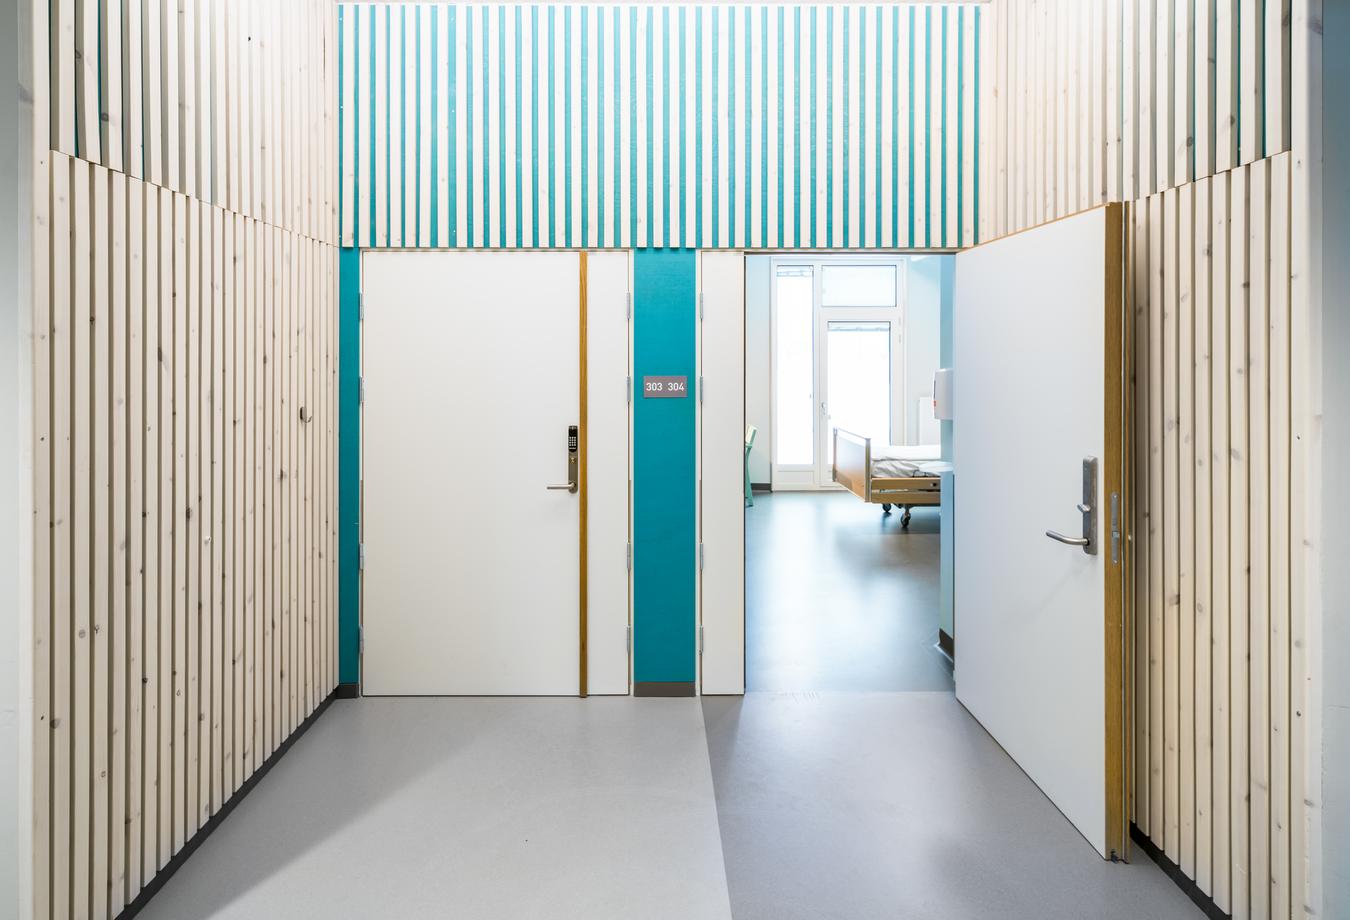 Hospital corridor with wooden pillars and turquoise details. Photo